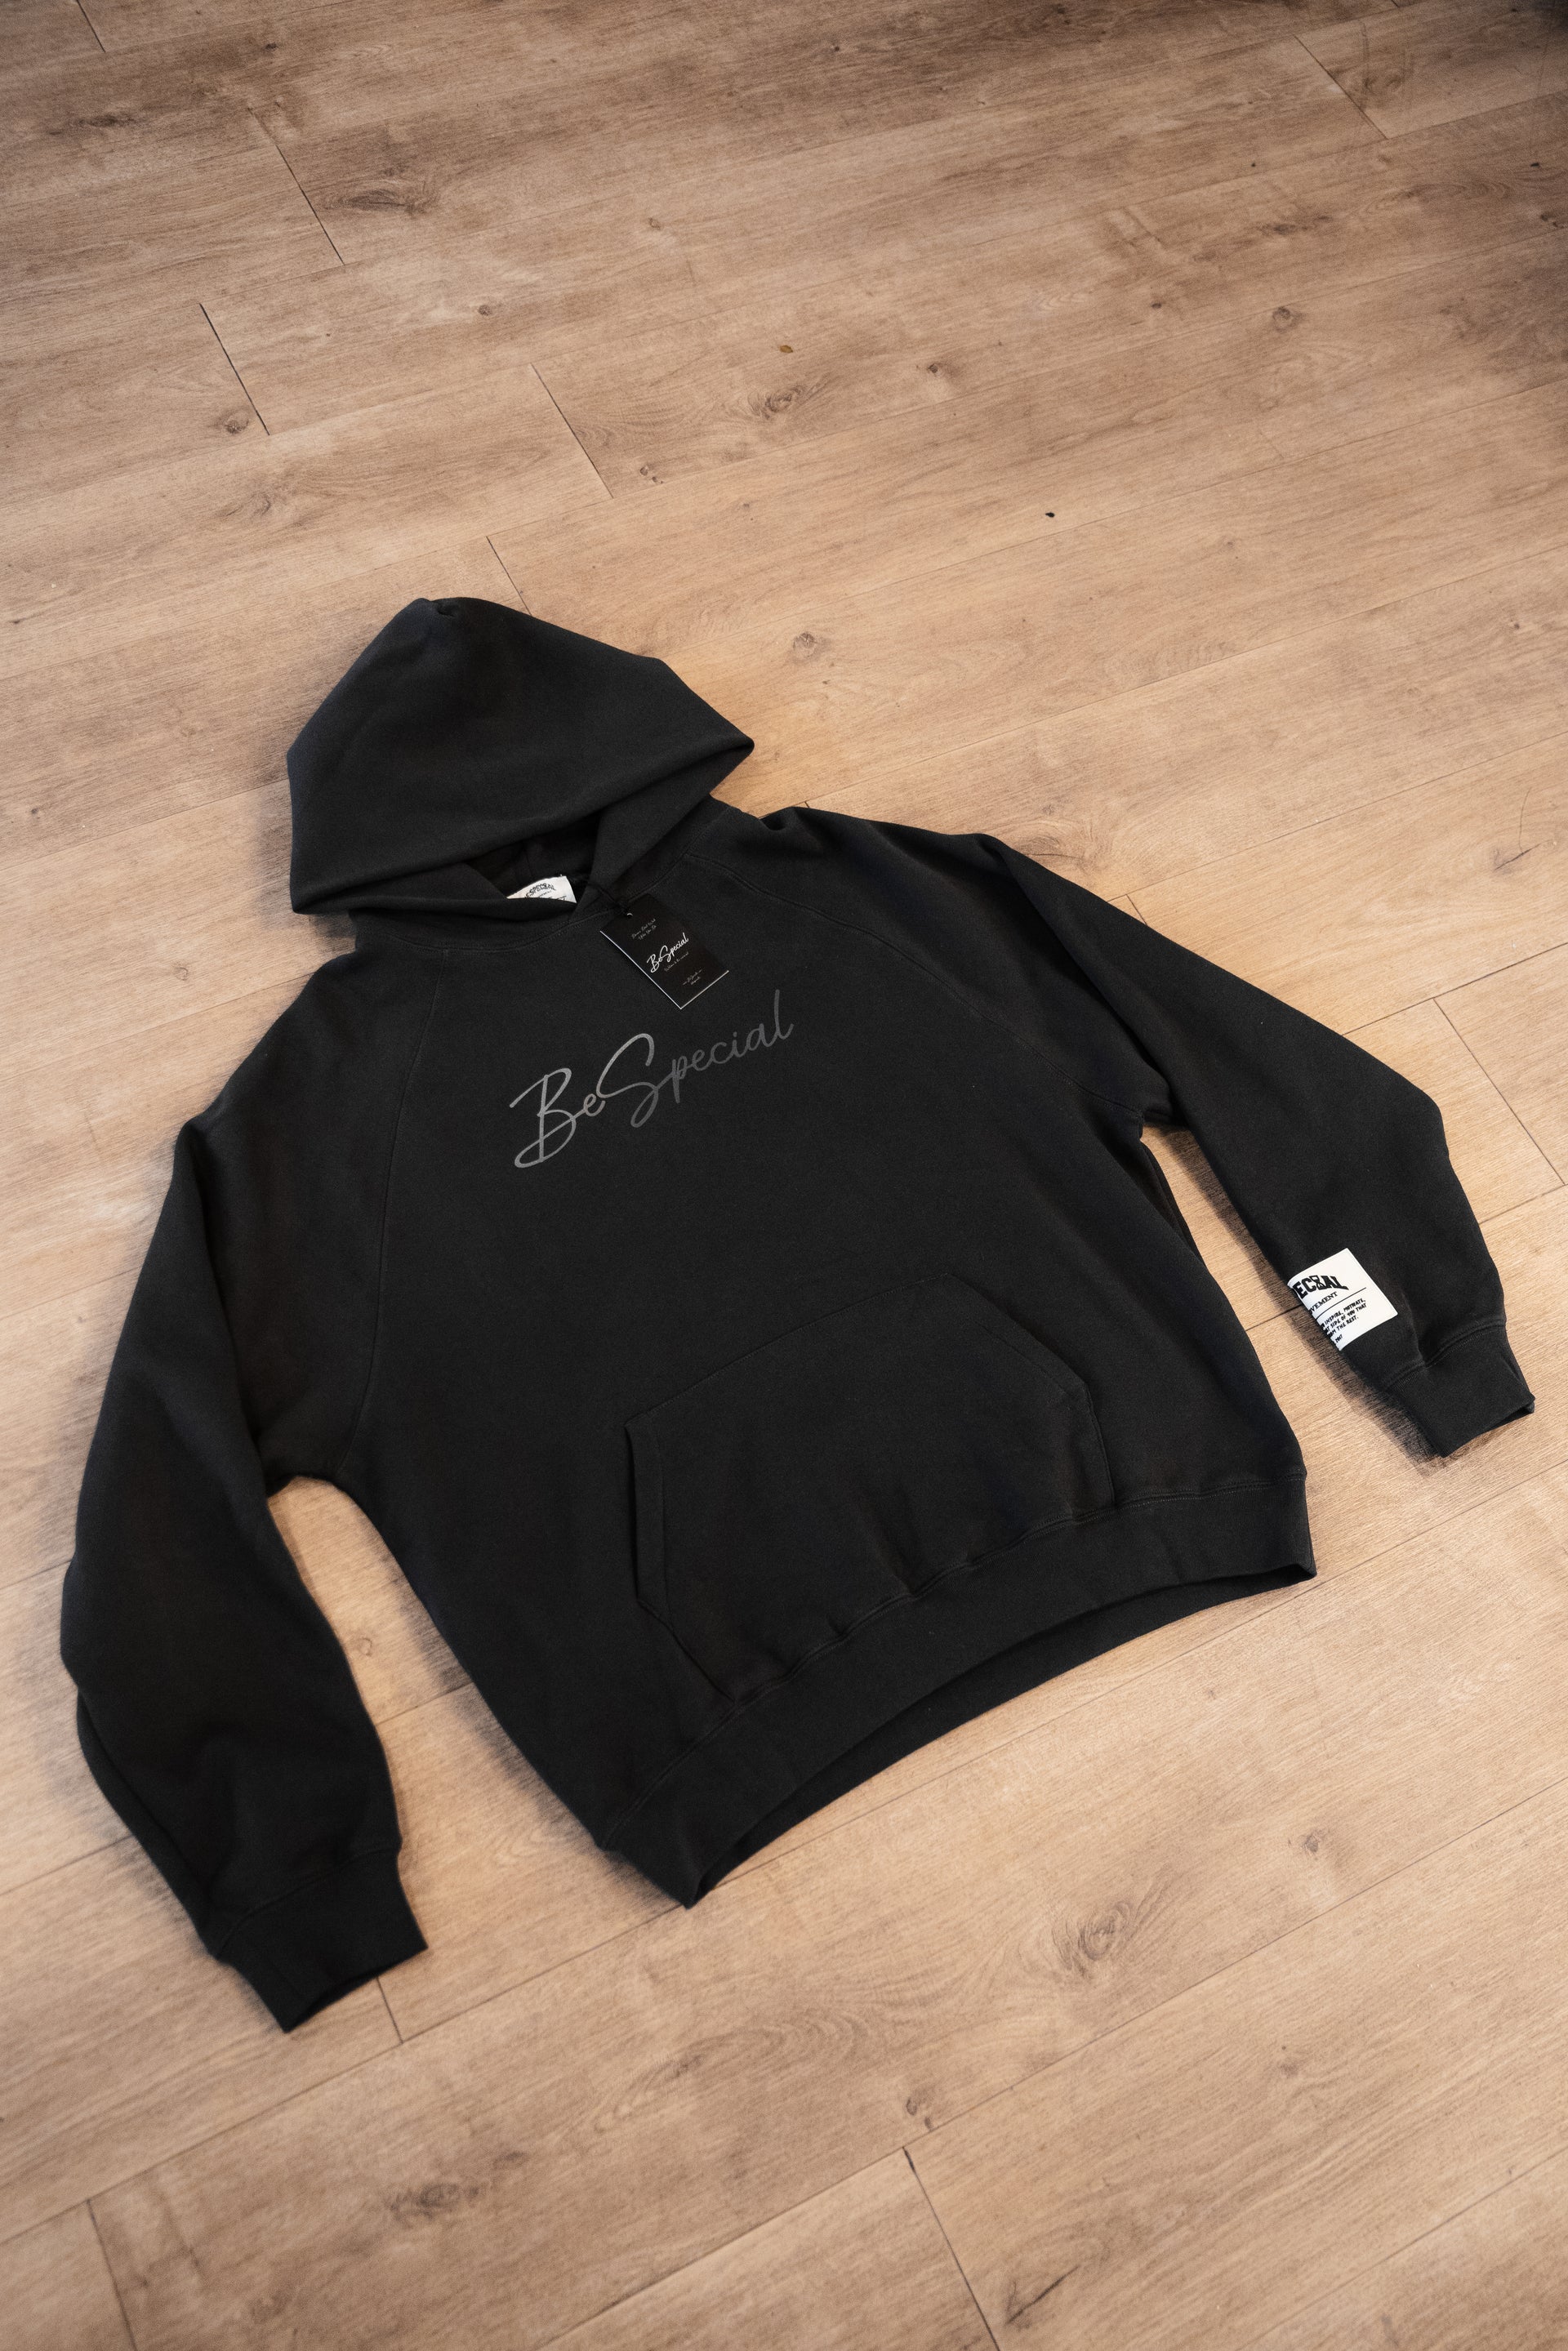 BeSpecial COZY Black Hoodie – BeSpecial: The Movement